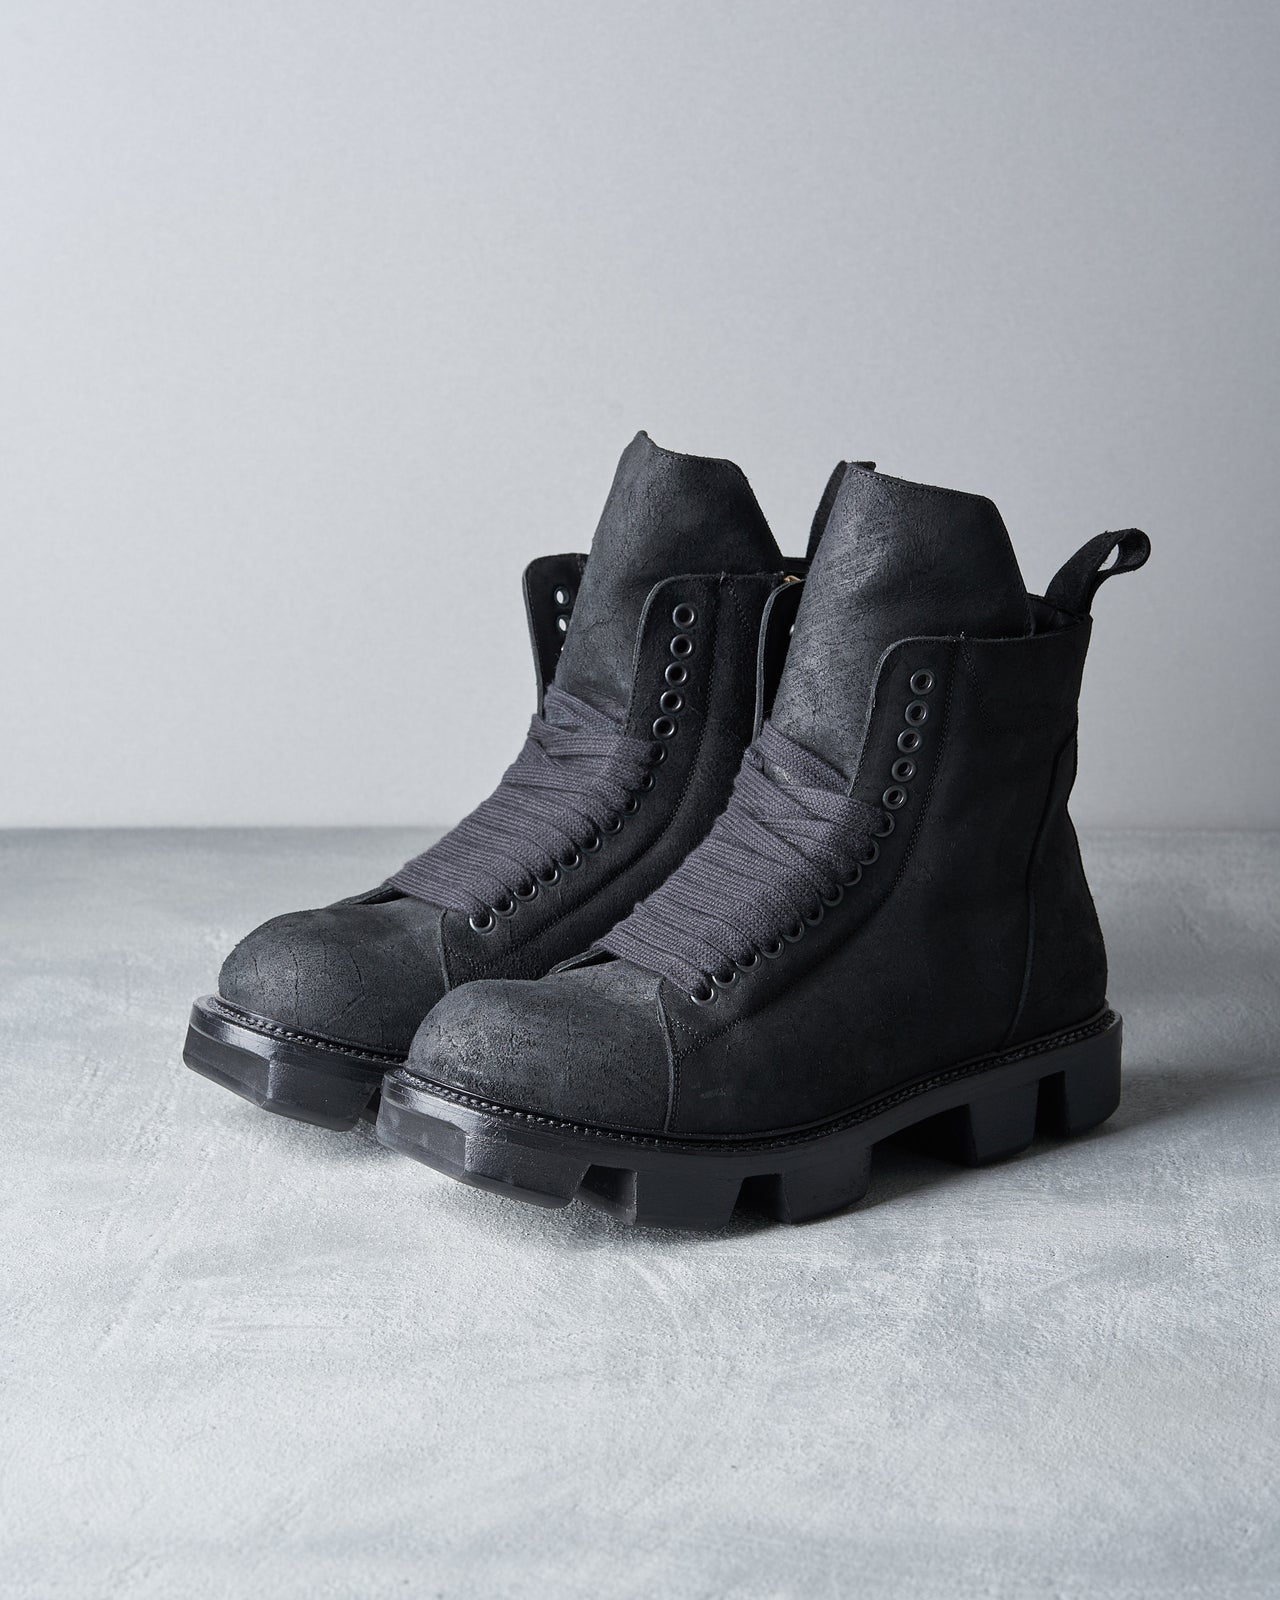 Rick Owens FW 2013 Plinth Hiker leather boot